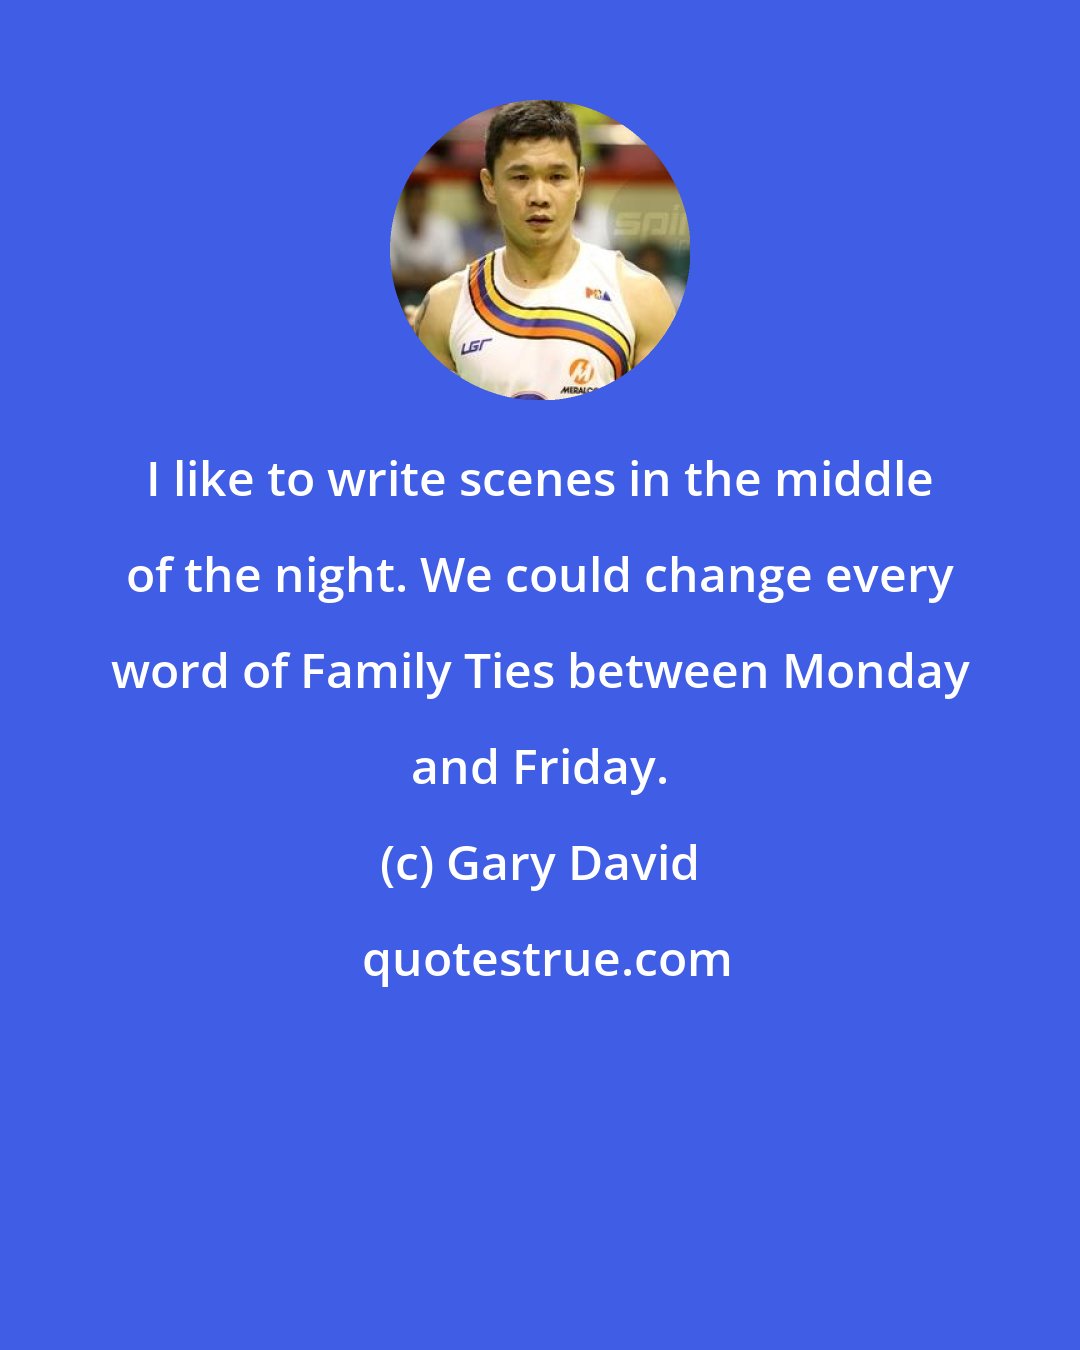 Gary David: I like to write scenes in the middle of the night. We could change every word of Family Ties between Monday and Friday.